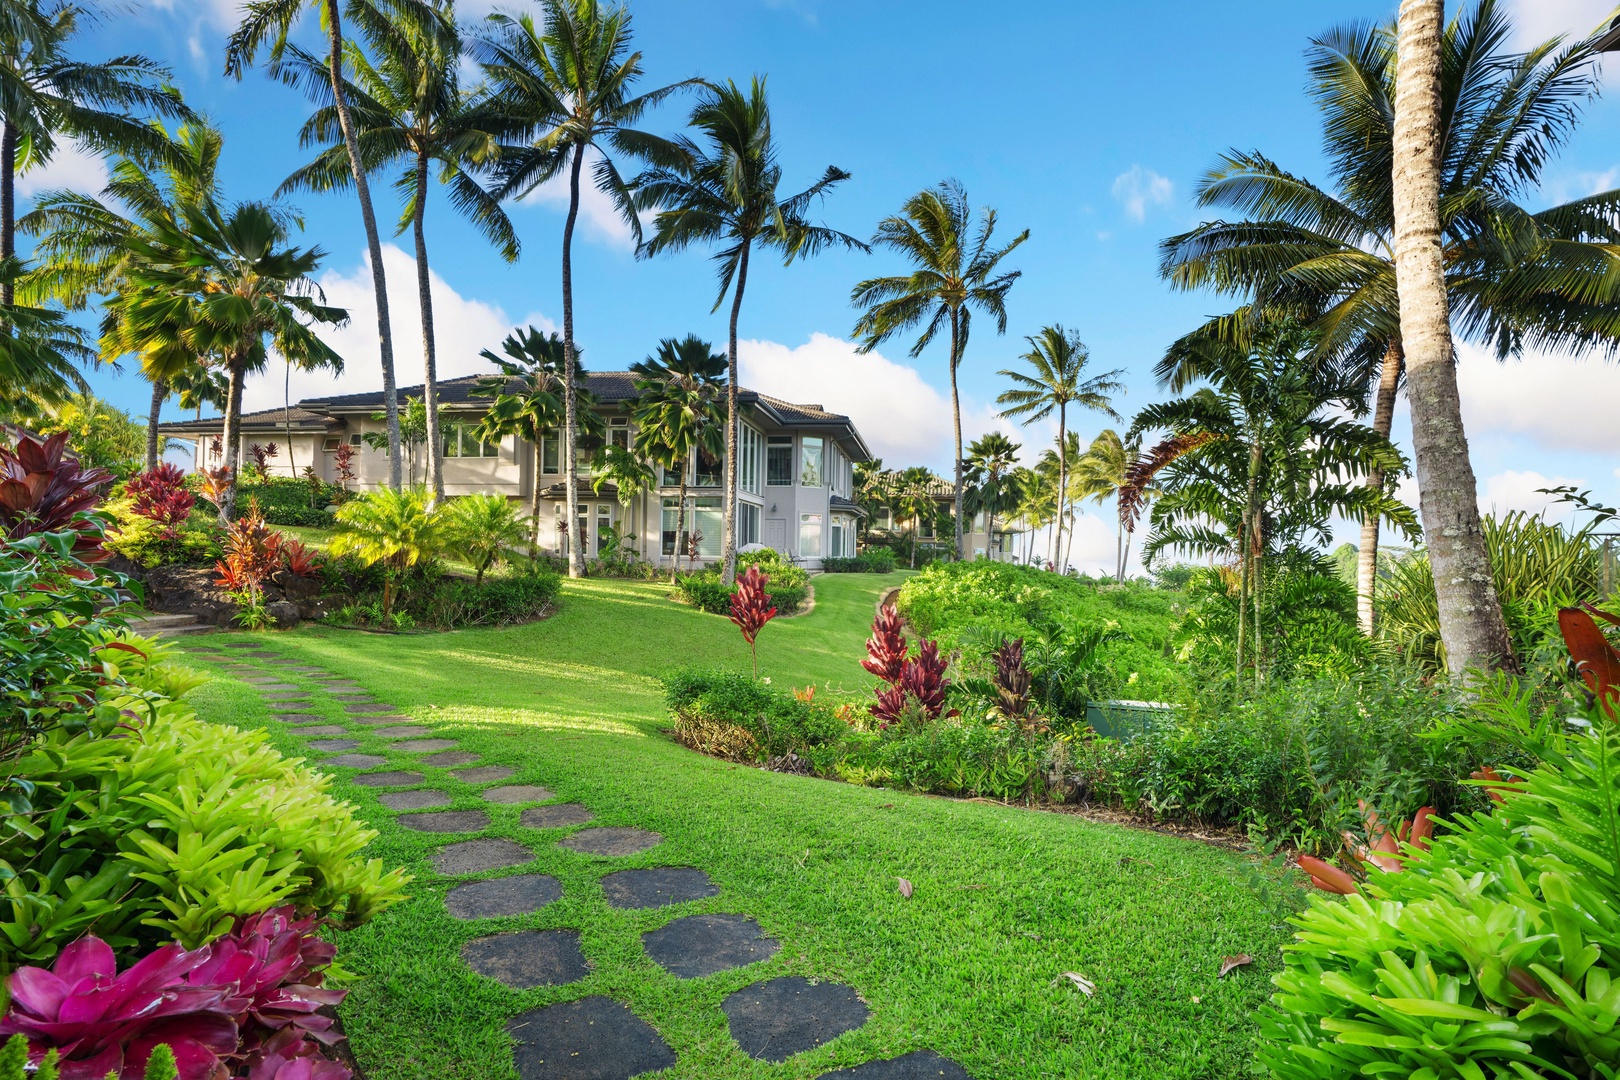 Princeville Vacation Rentals, Tropical Elegance - Step into a tropical paradise where lush greenery meets the azure sky.